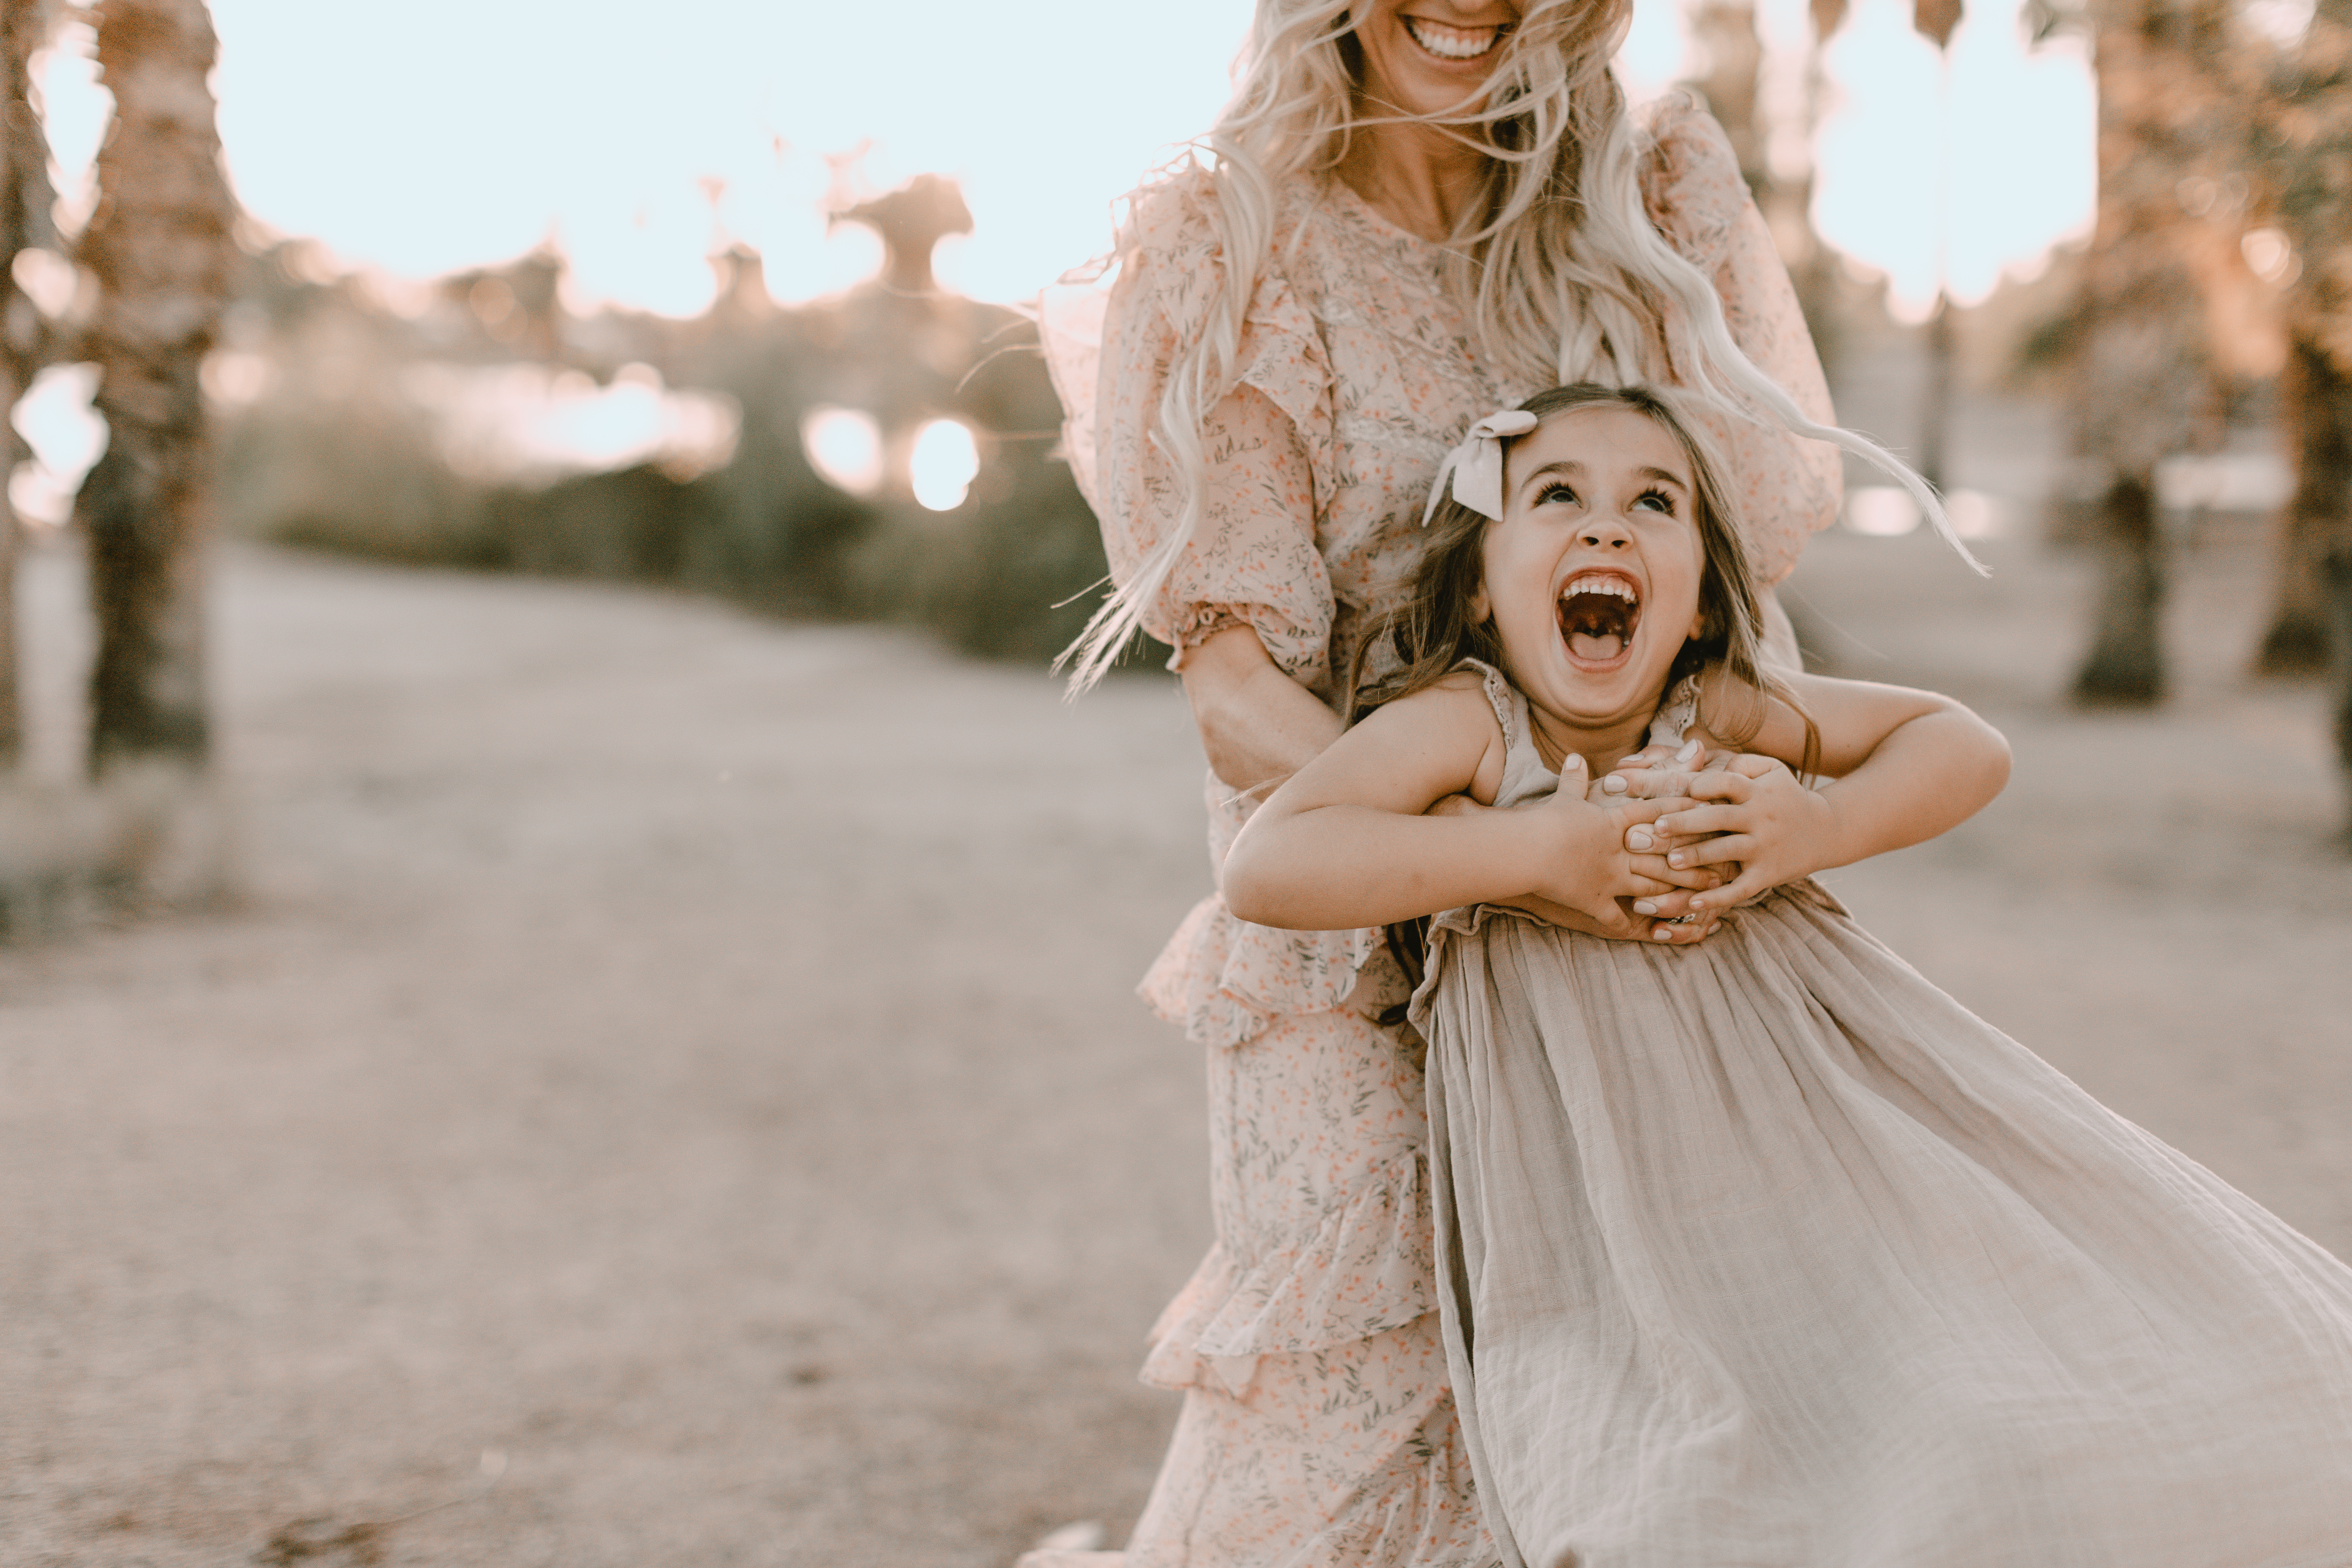 mother and daughter spinning with joy/ #mommyandme #familyphotos #thelovedesignedlife